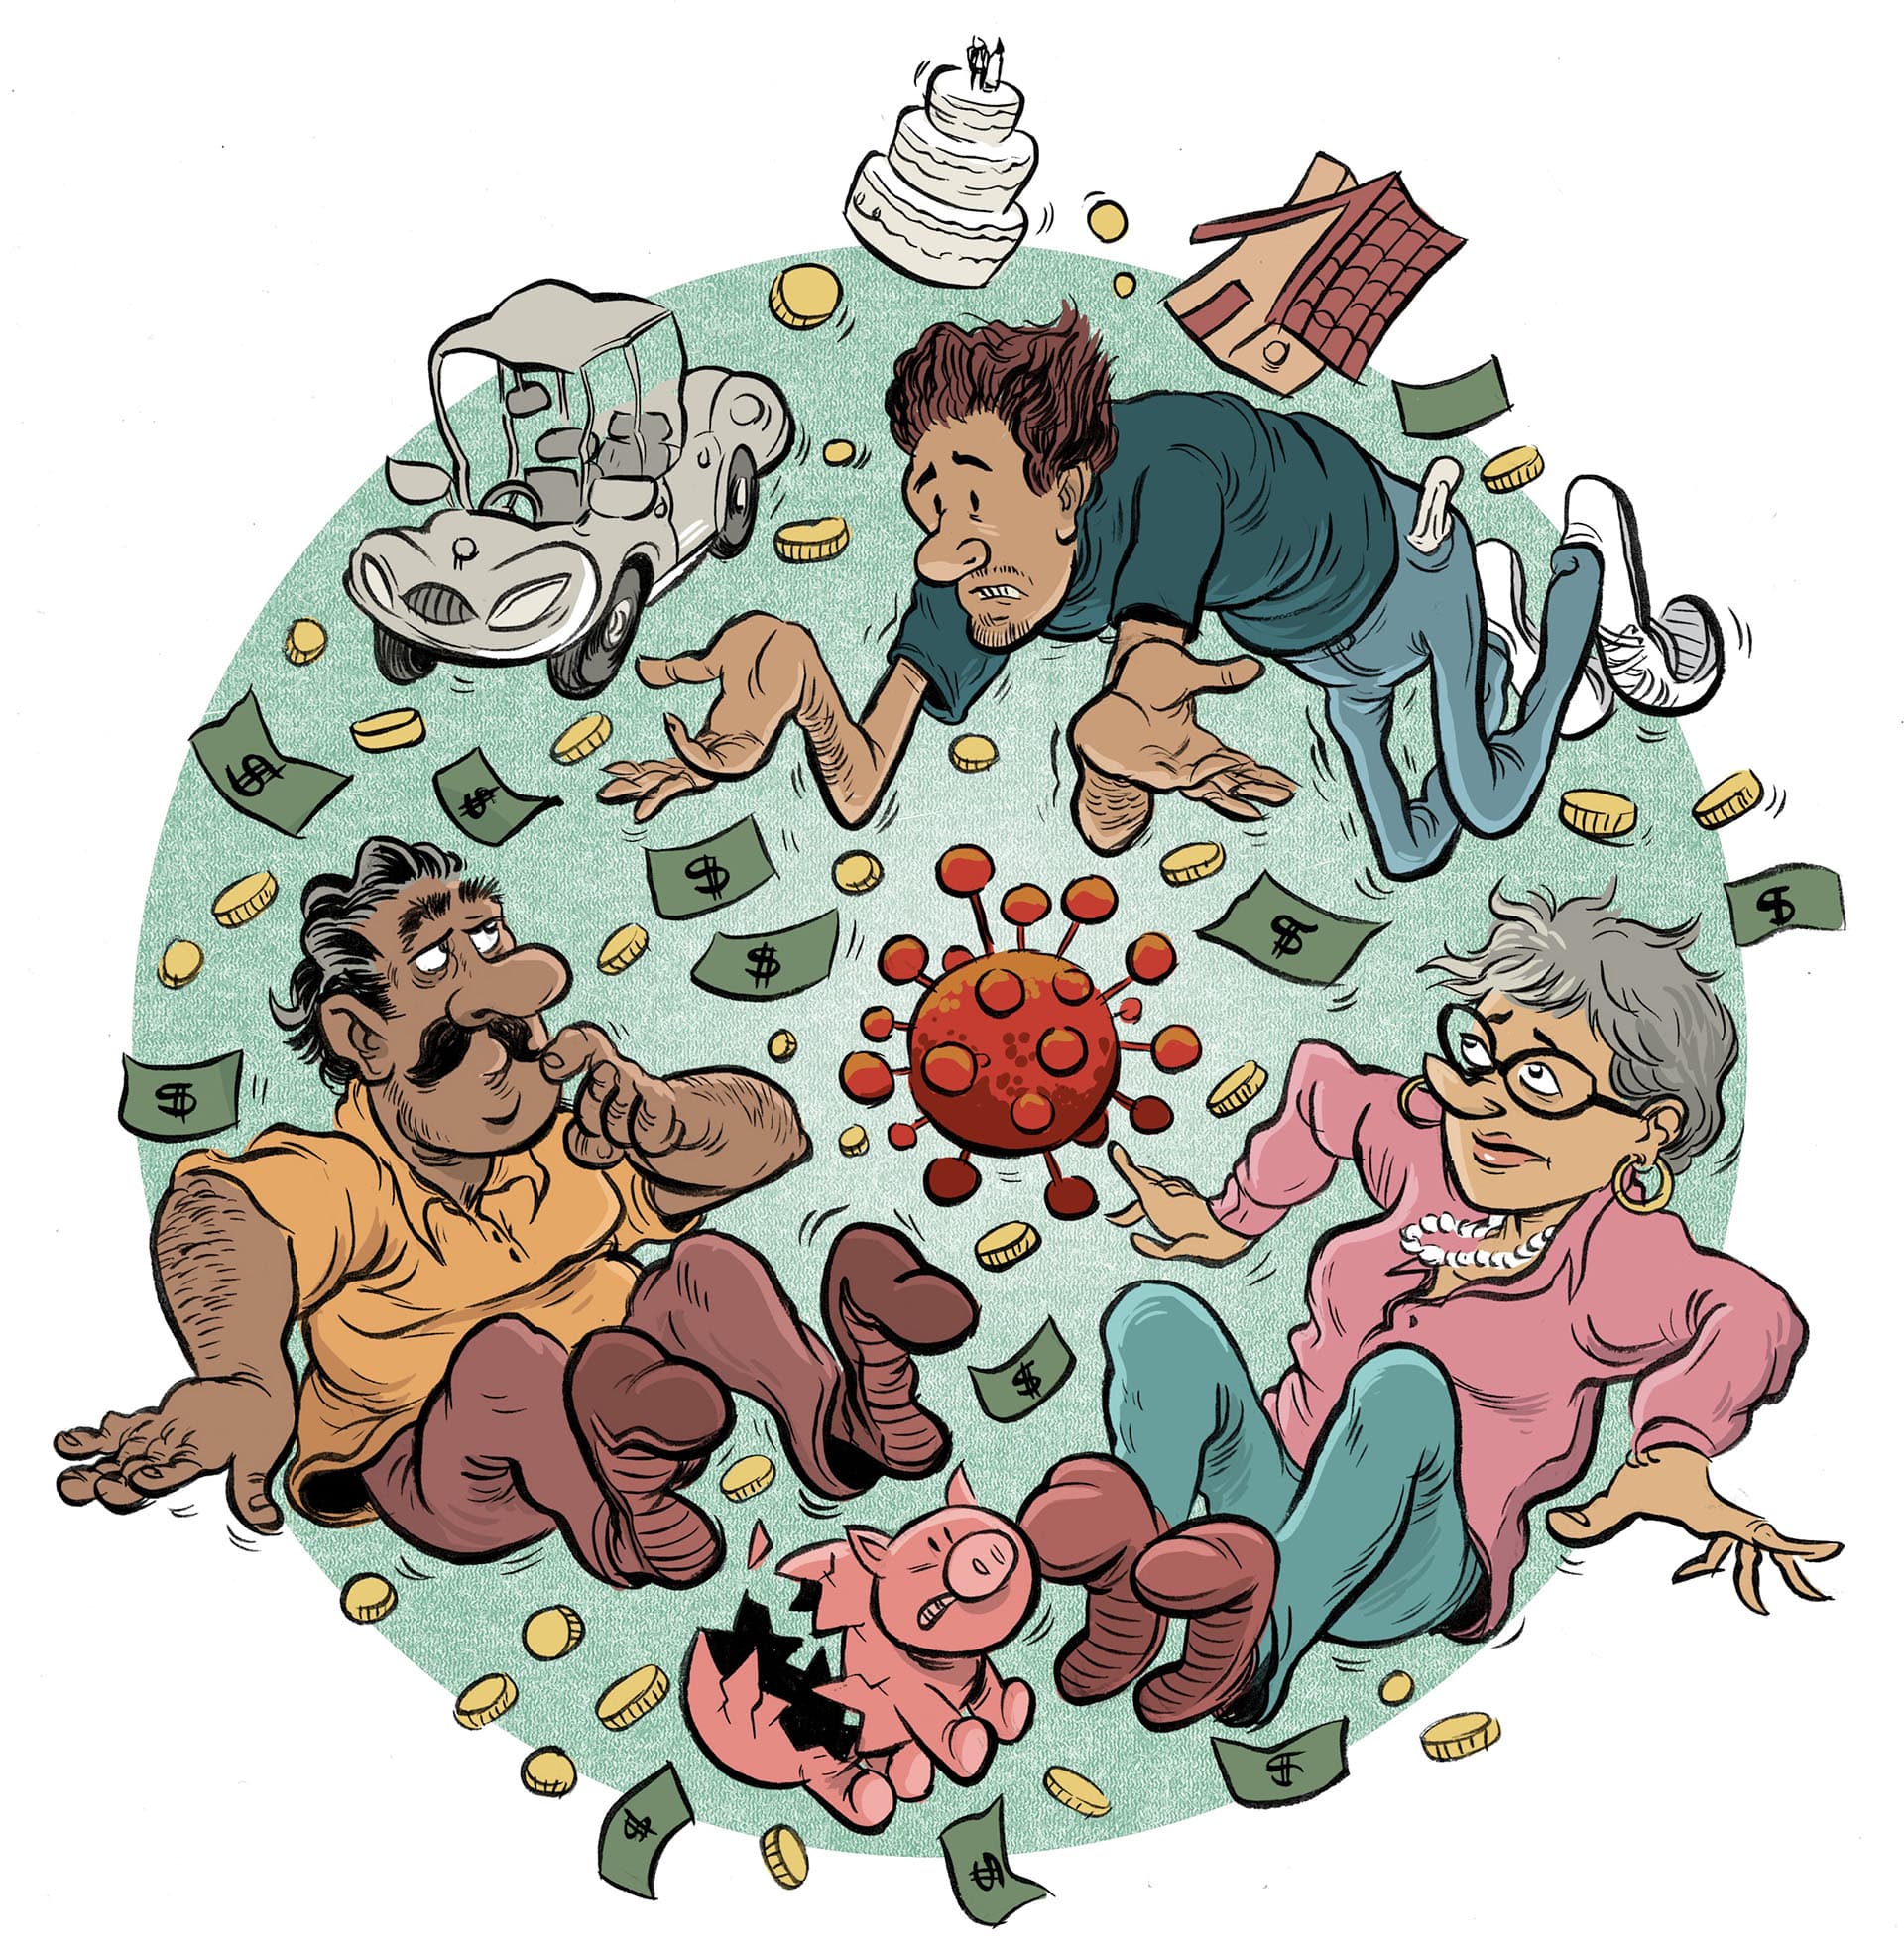 Illustration of kids and parents with financial imagery